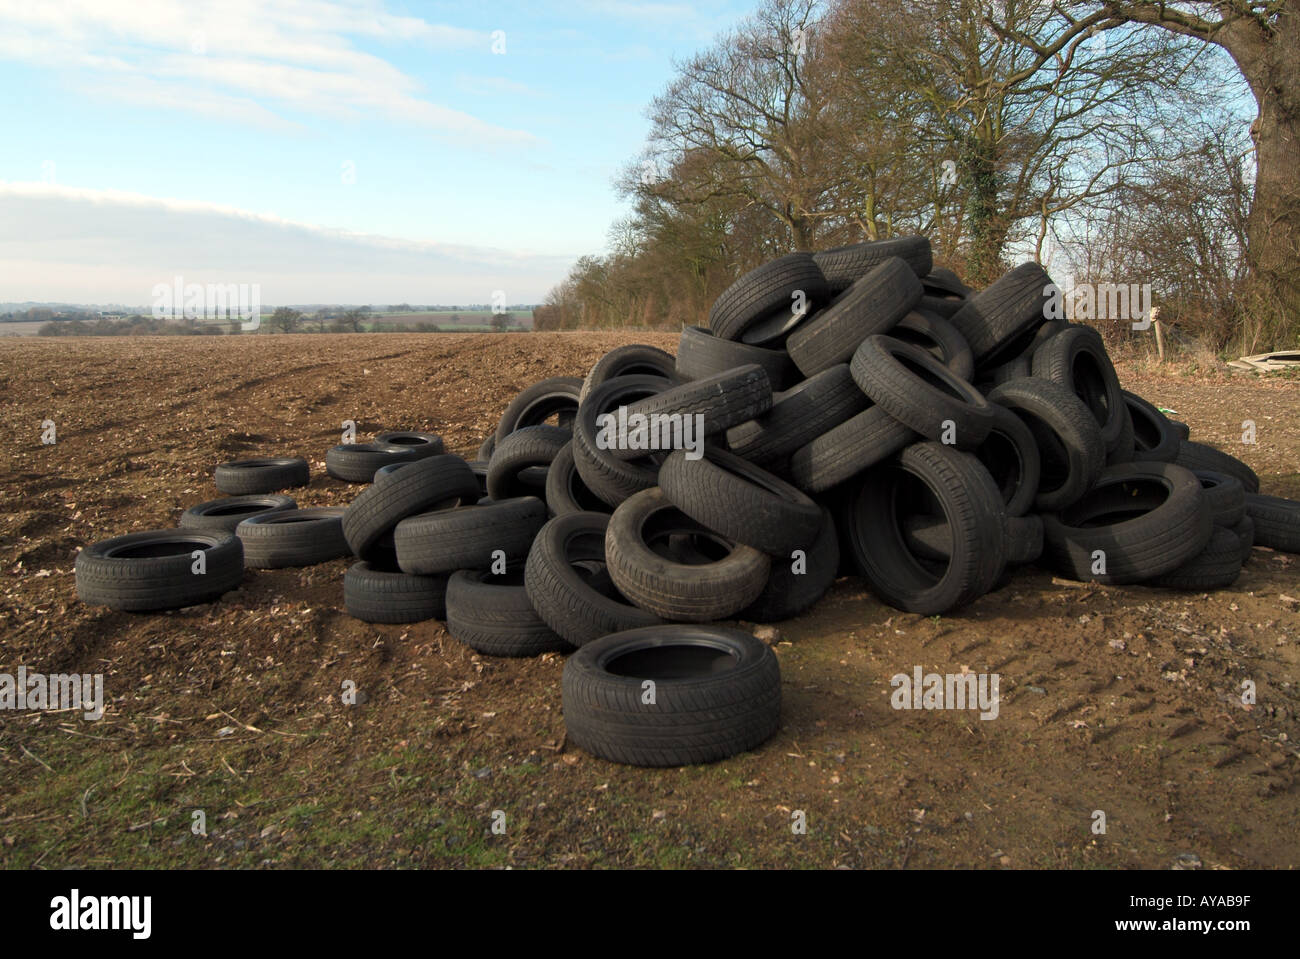 Illegal fly tipping of vehicle tyres dumped in farm field to avoid paying disposal charges flytipping big problem in countryside Essex England UK Stock Photo